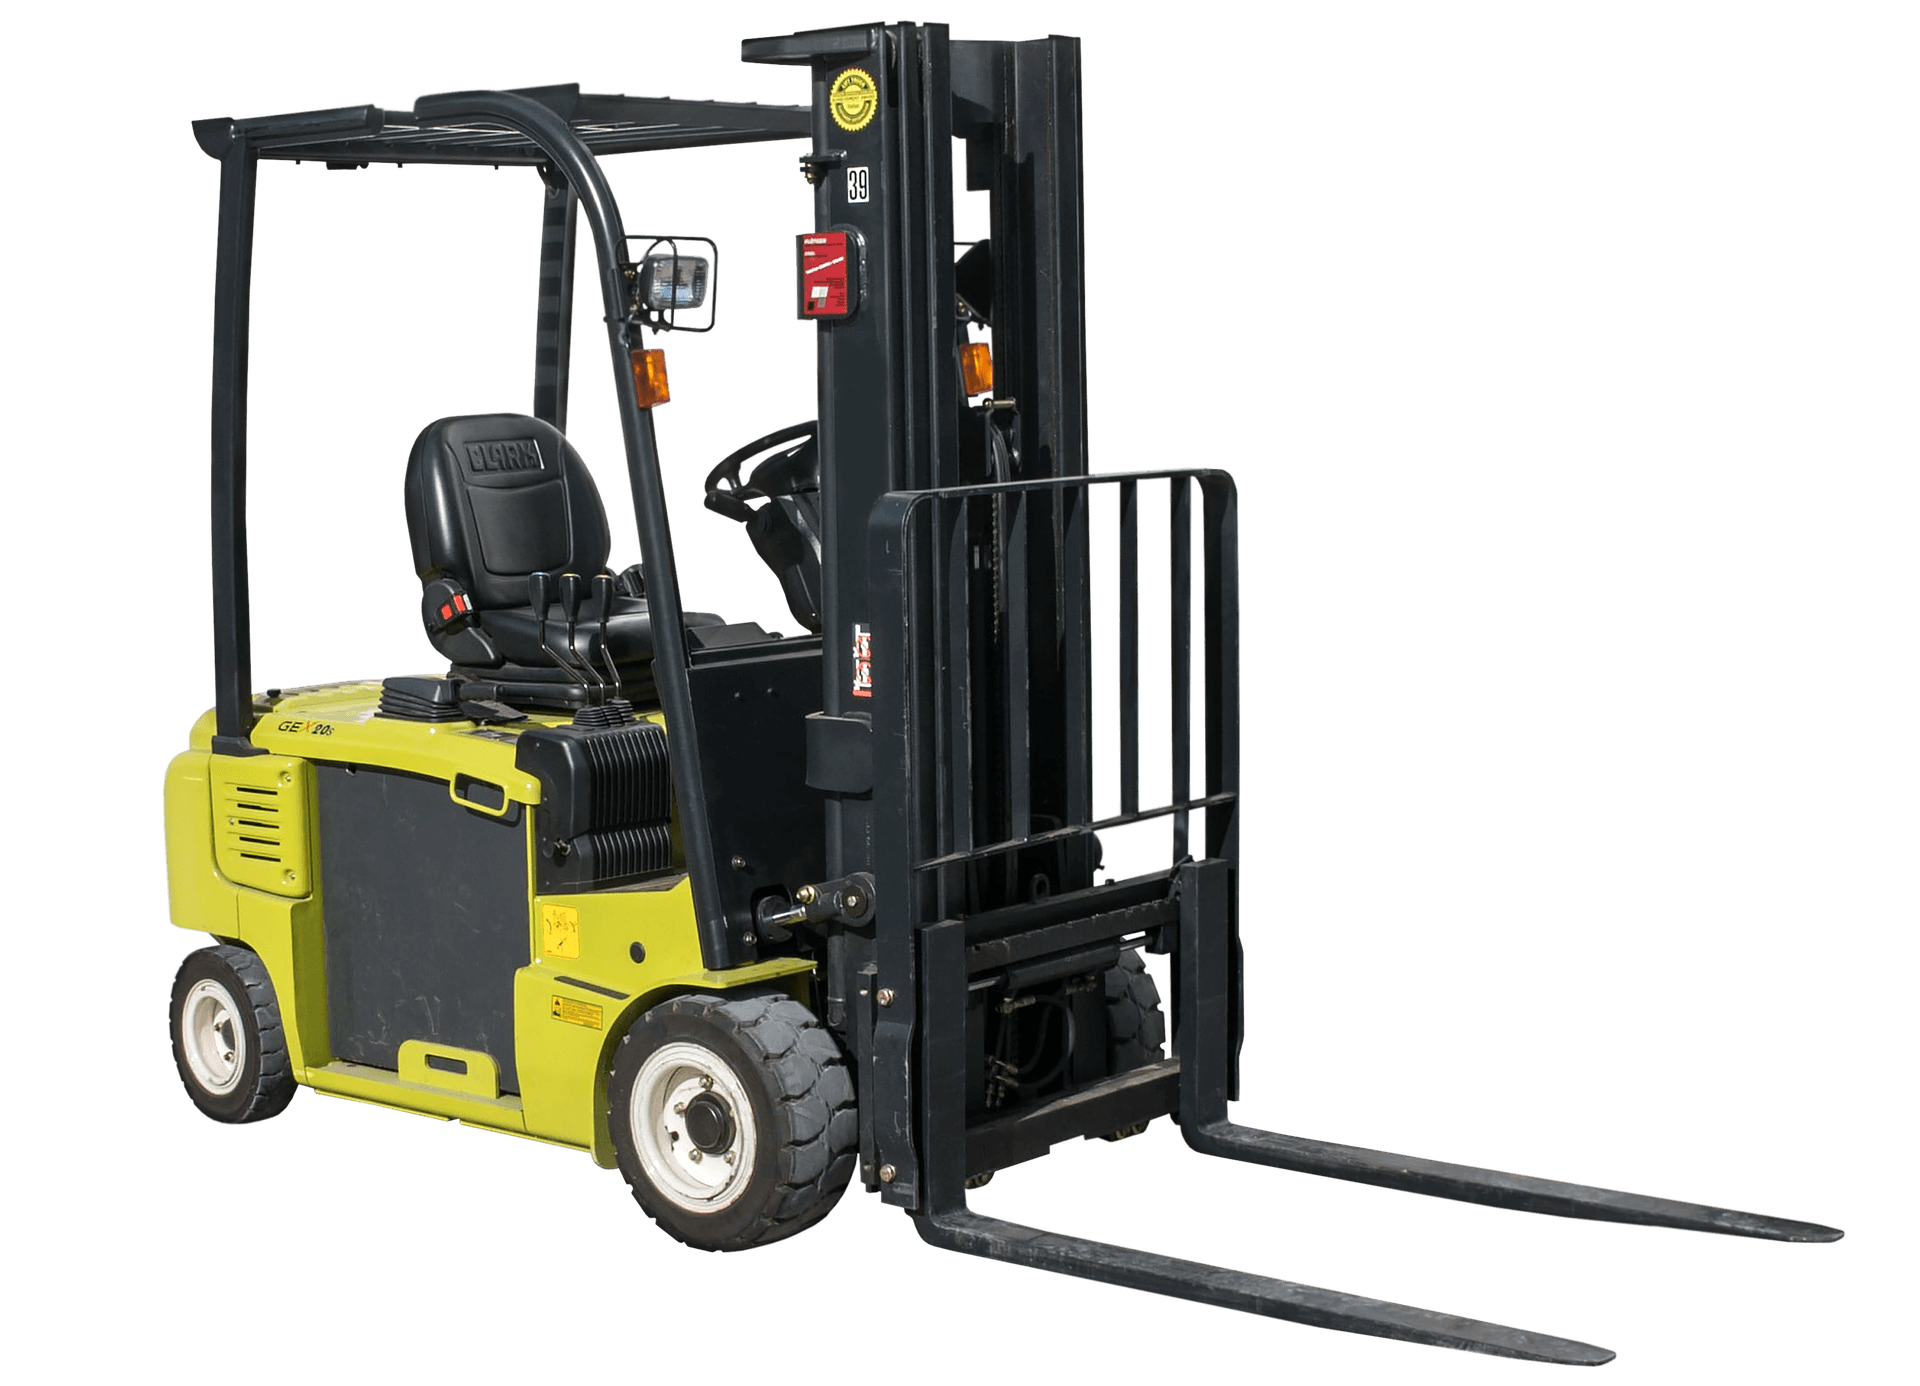 Forklift from A2 forklift (see image)